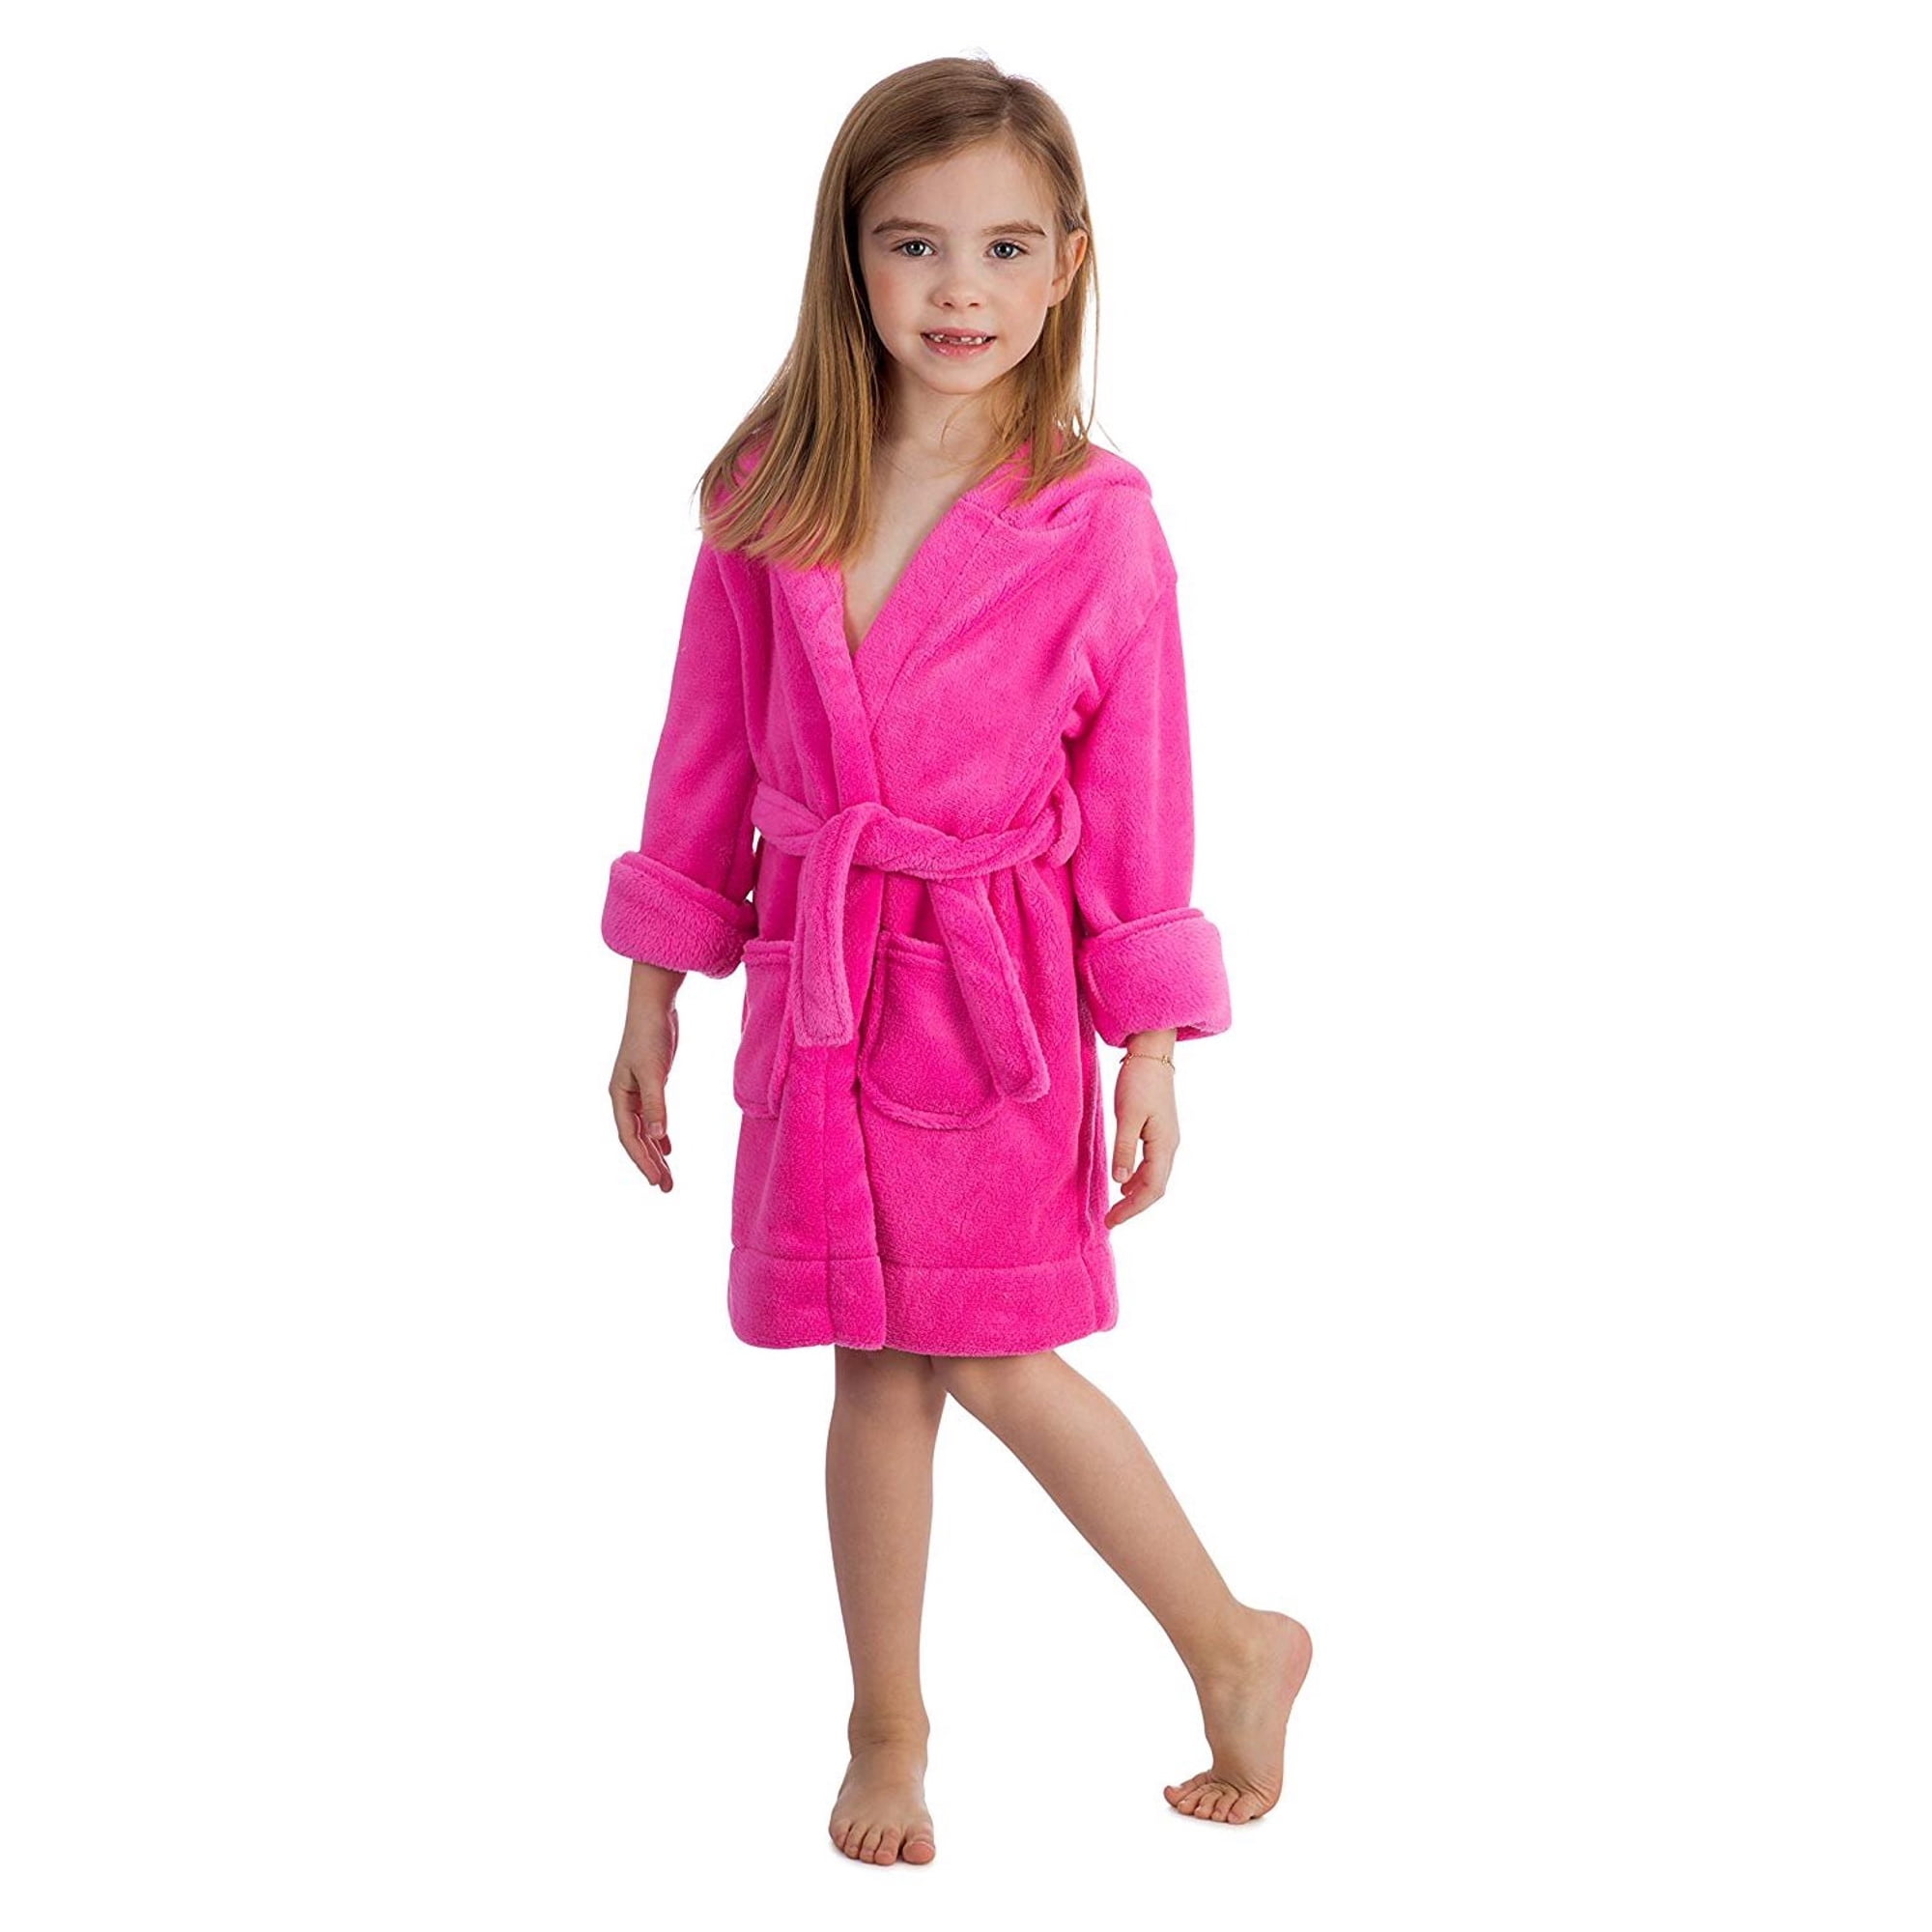 Men :: Luxury Microfiber Plush Lined Robe Pink - Wholesale bathrobes, Spa  robes, Kids robes, Cotton robes, Spa Slippers, Wholesale Towels